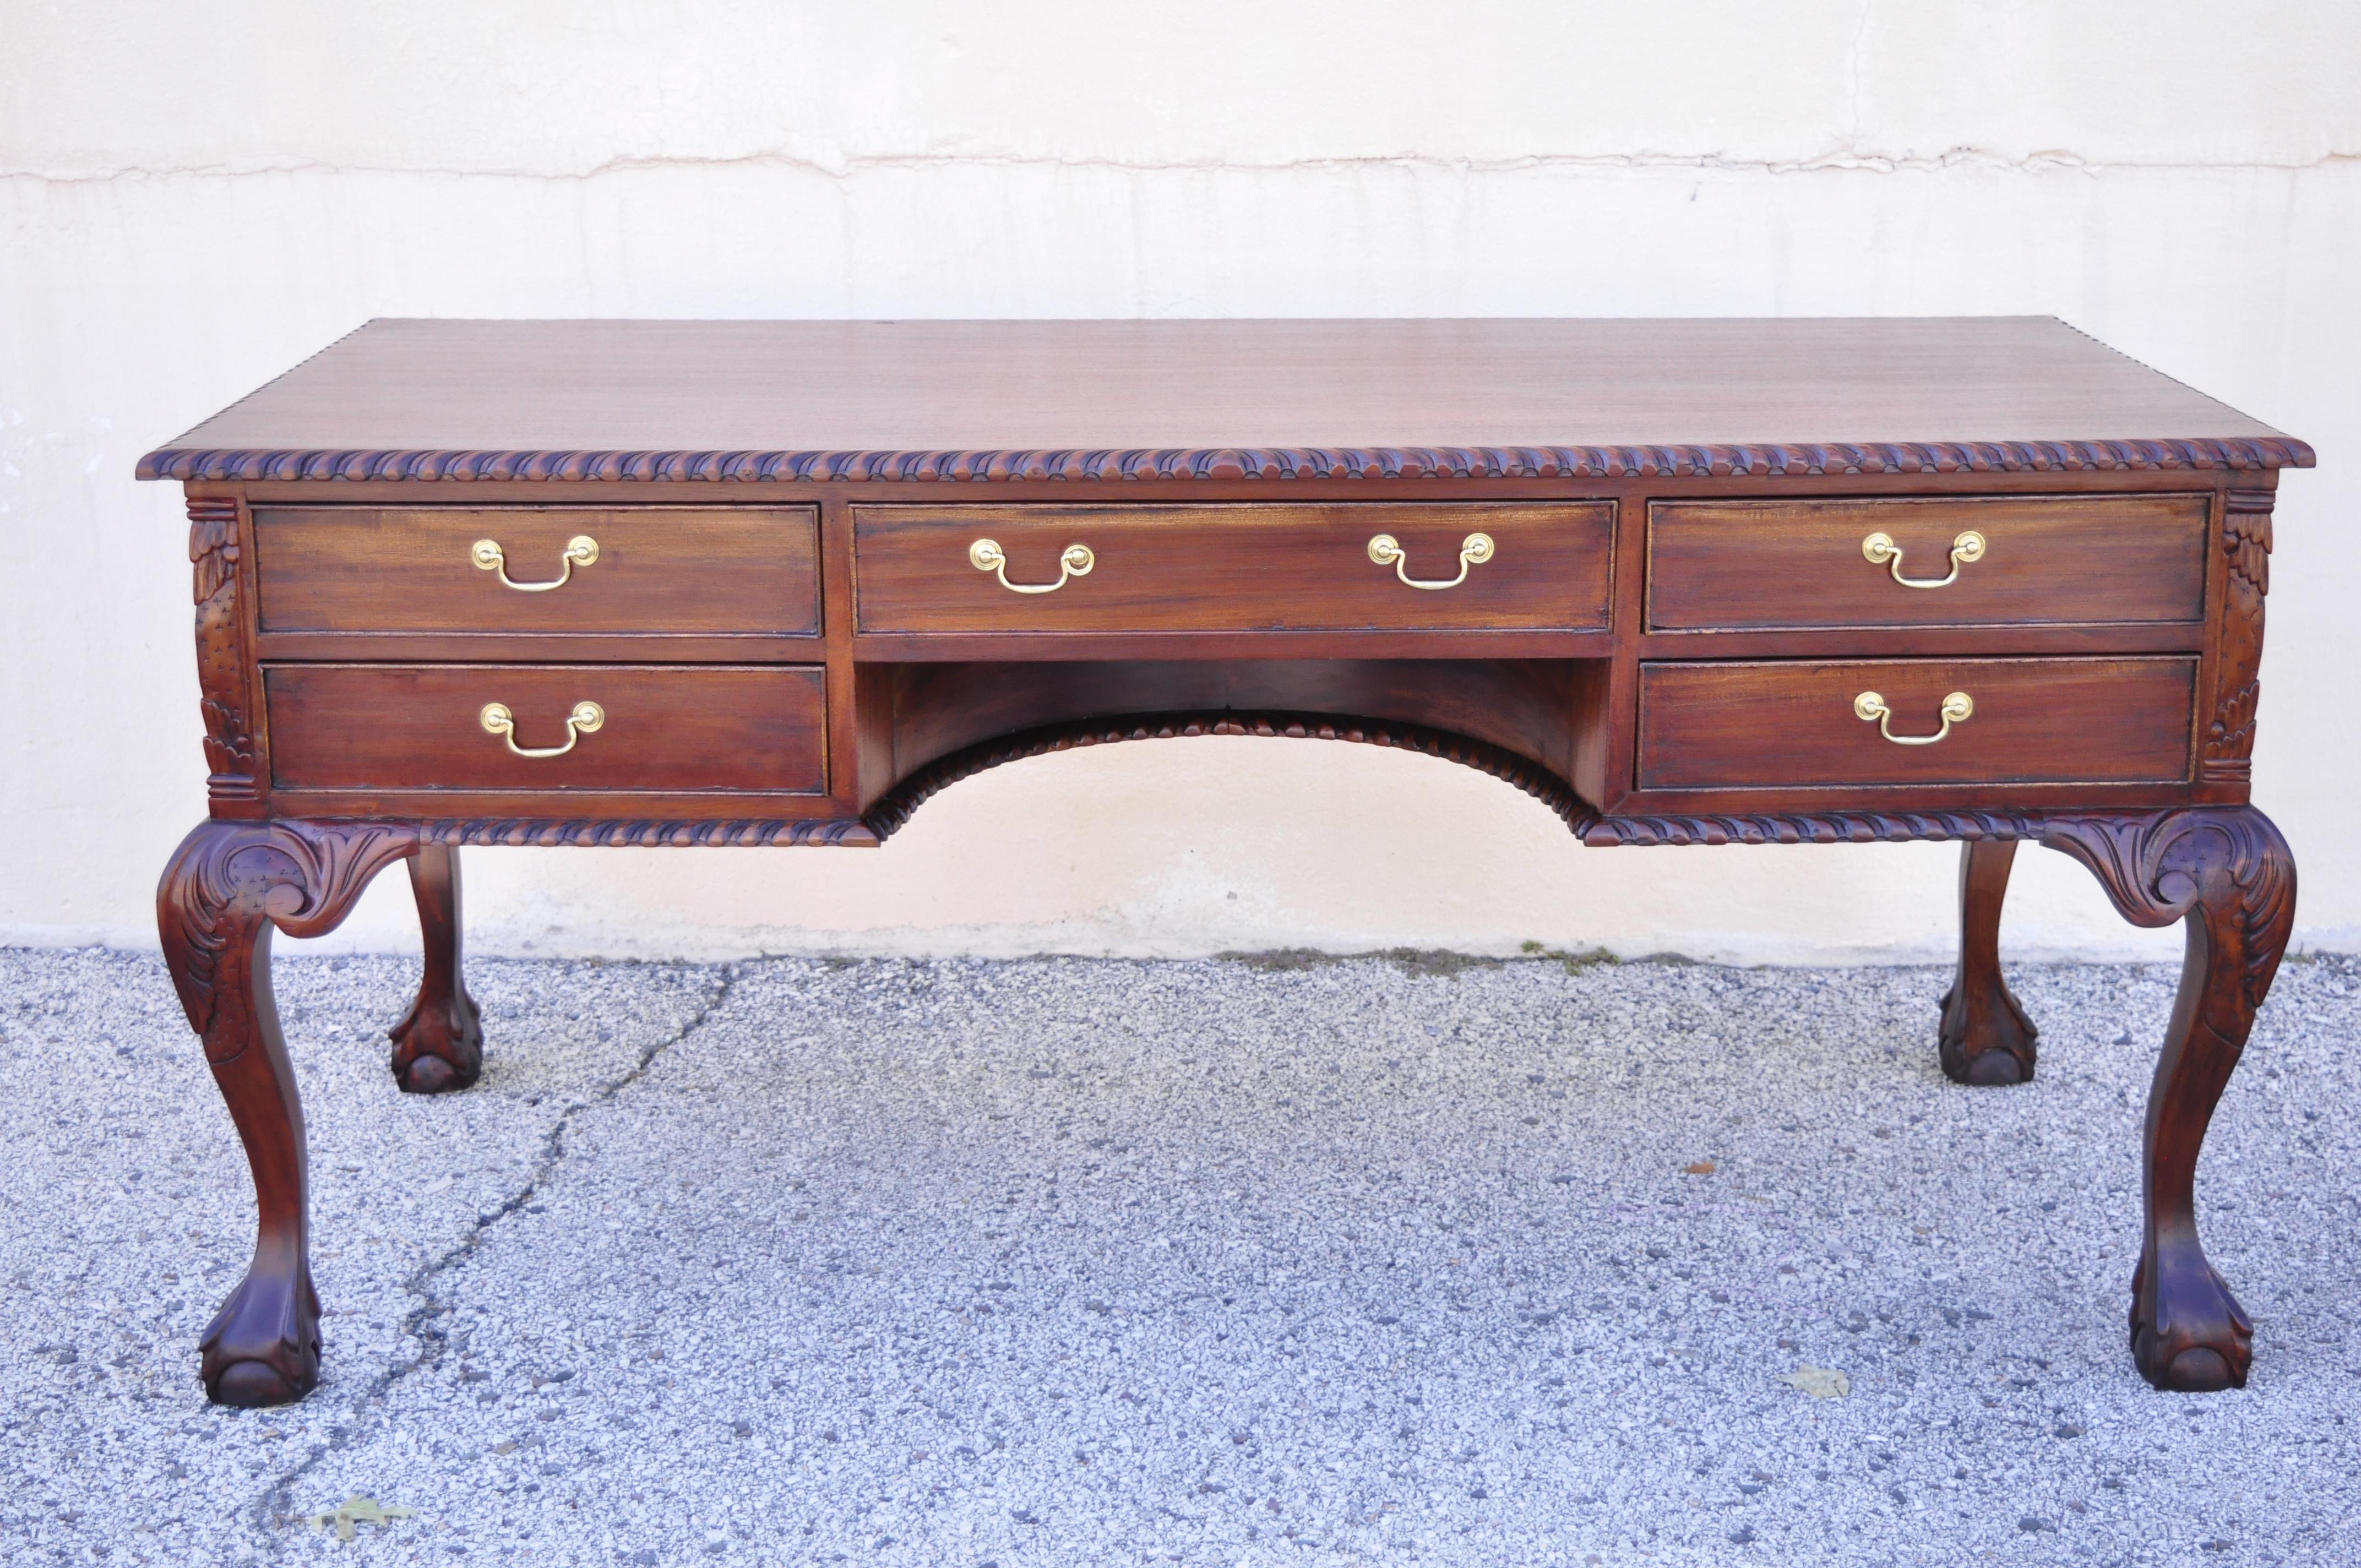 Reproduction English chippendale style mahogany ball & claw carved executive writing desk. Item features nice large size, rope carved edge, solid wood construction, beautiful wood grain, finished back, 5 dovetailed drawers, carved ball and claw